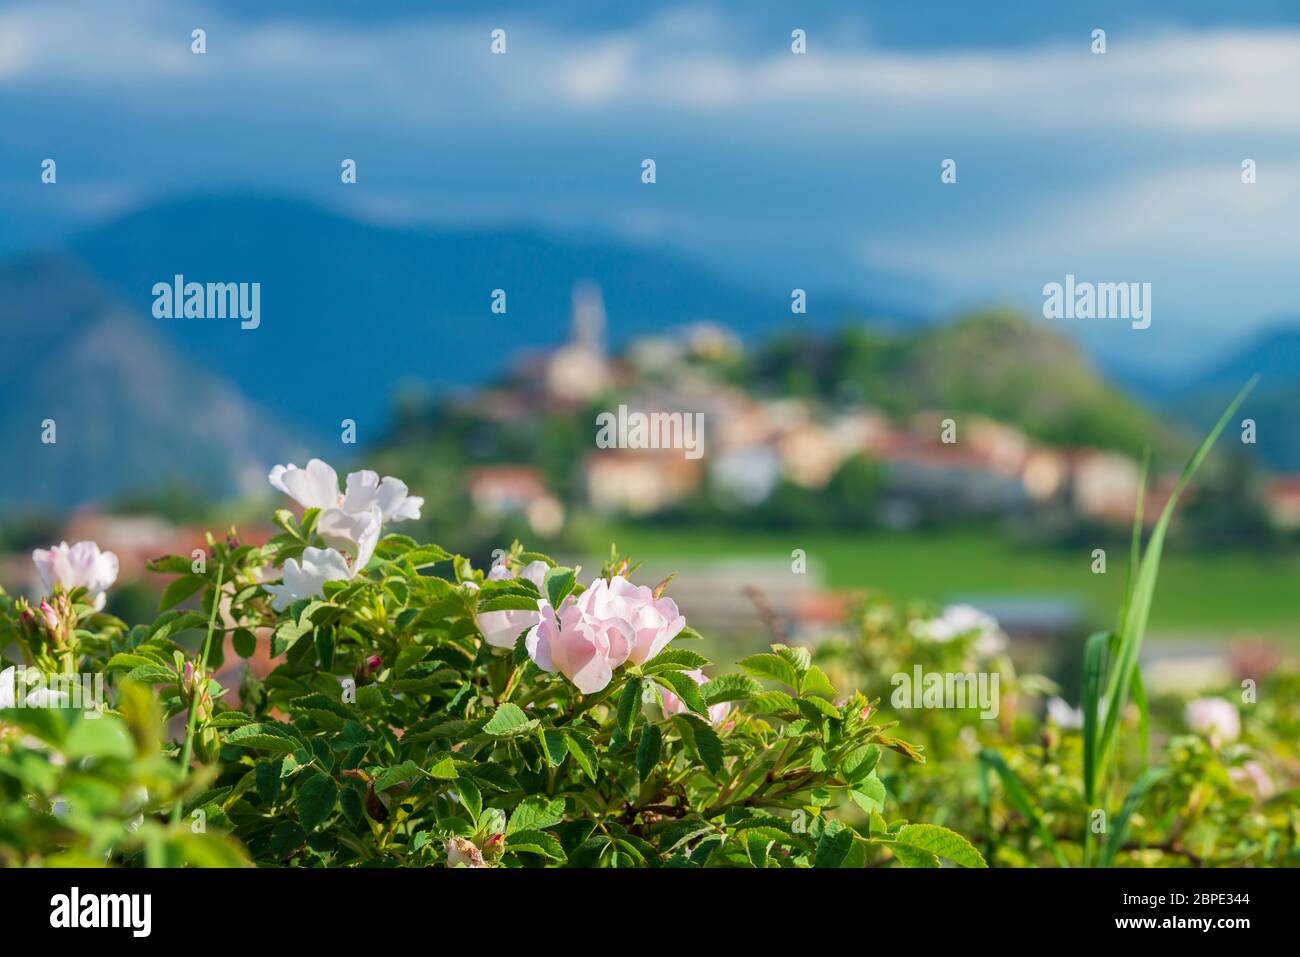 Wild roses in Provance. Selective focus on roses Stock Photo